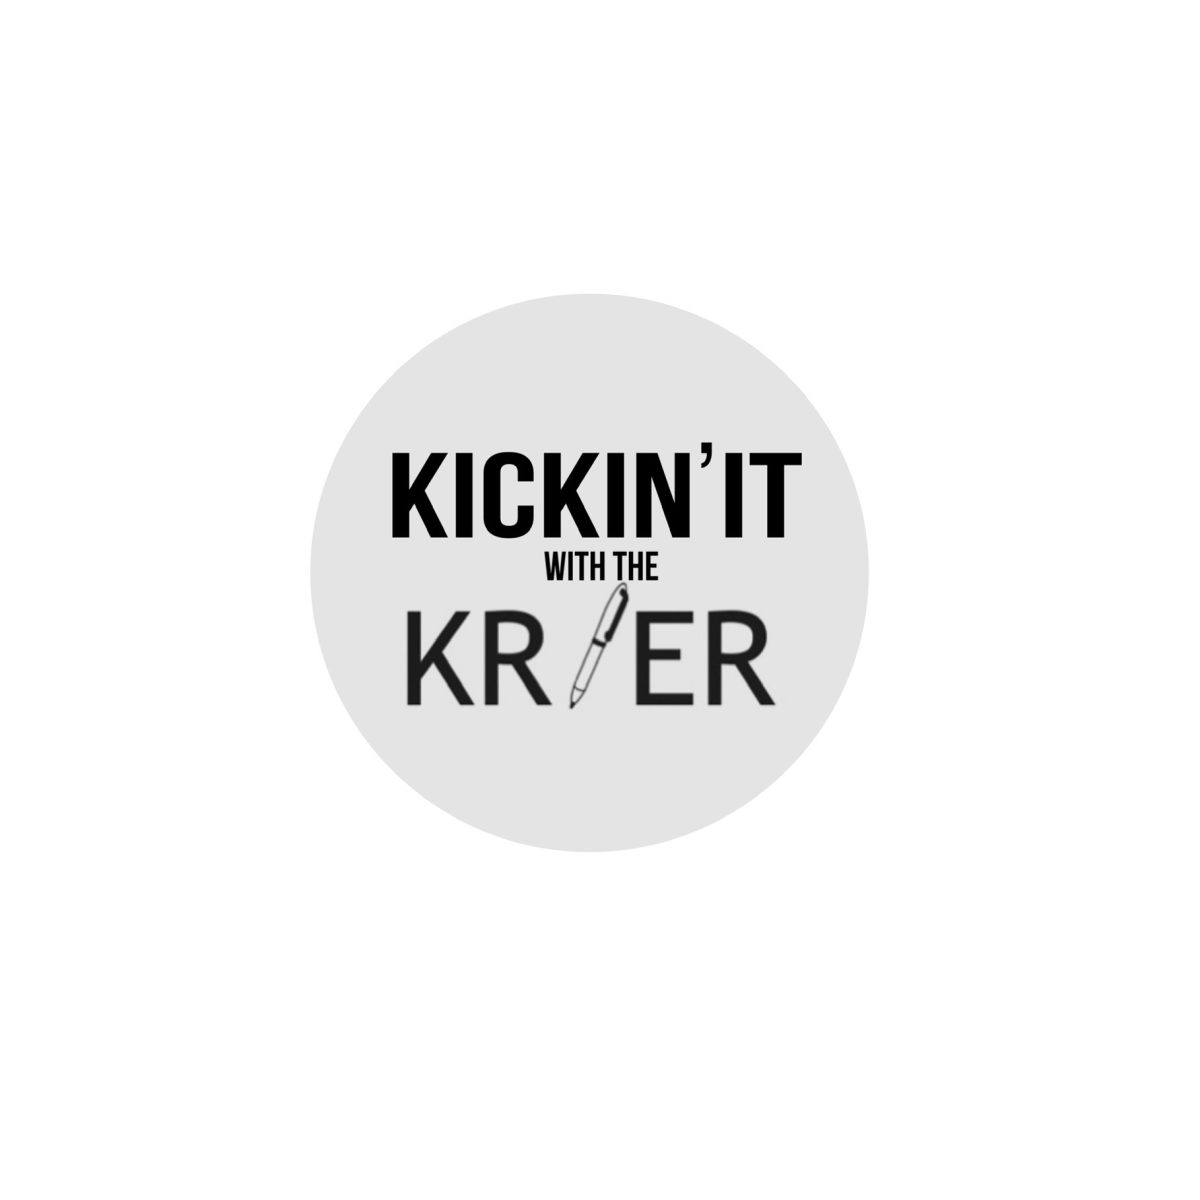 Kickin’ it with the Krier Episode 1 - 09/12